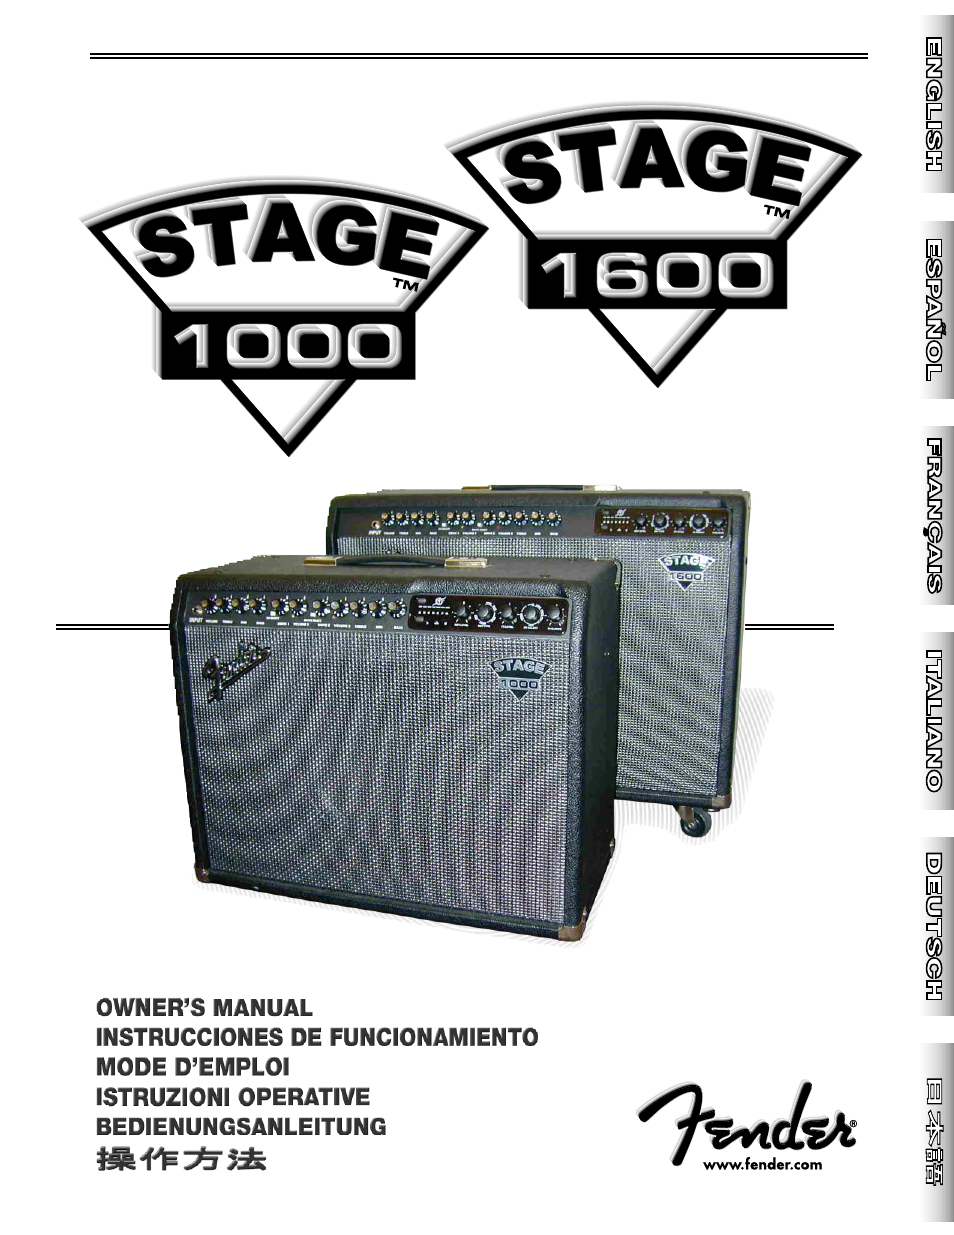 Fender Stage 1000 User Manual | 20 pages